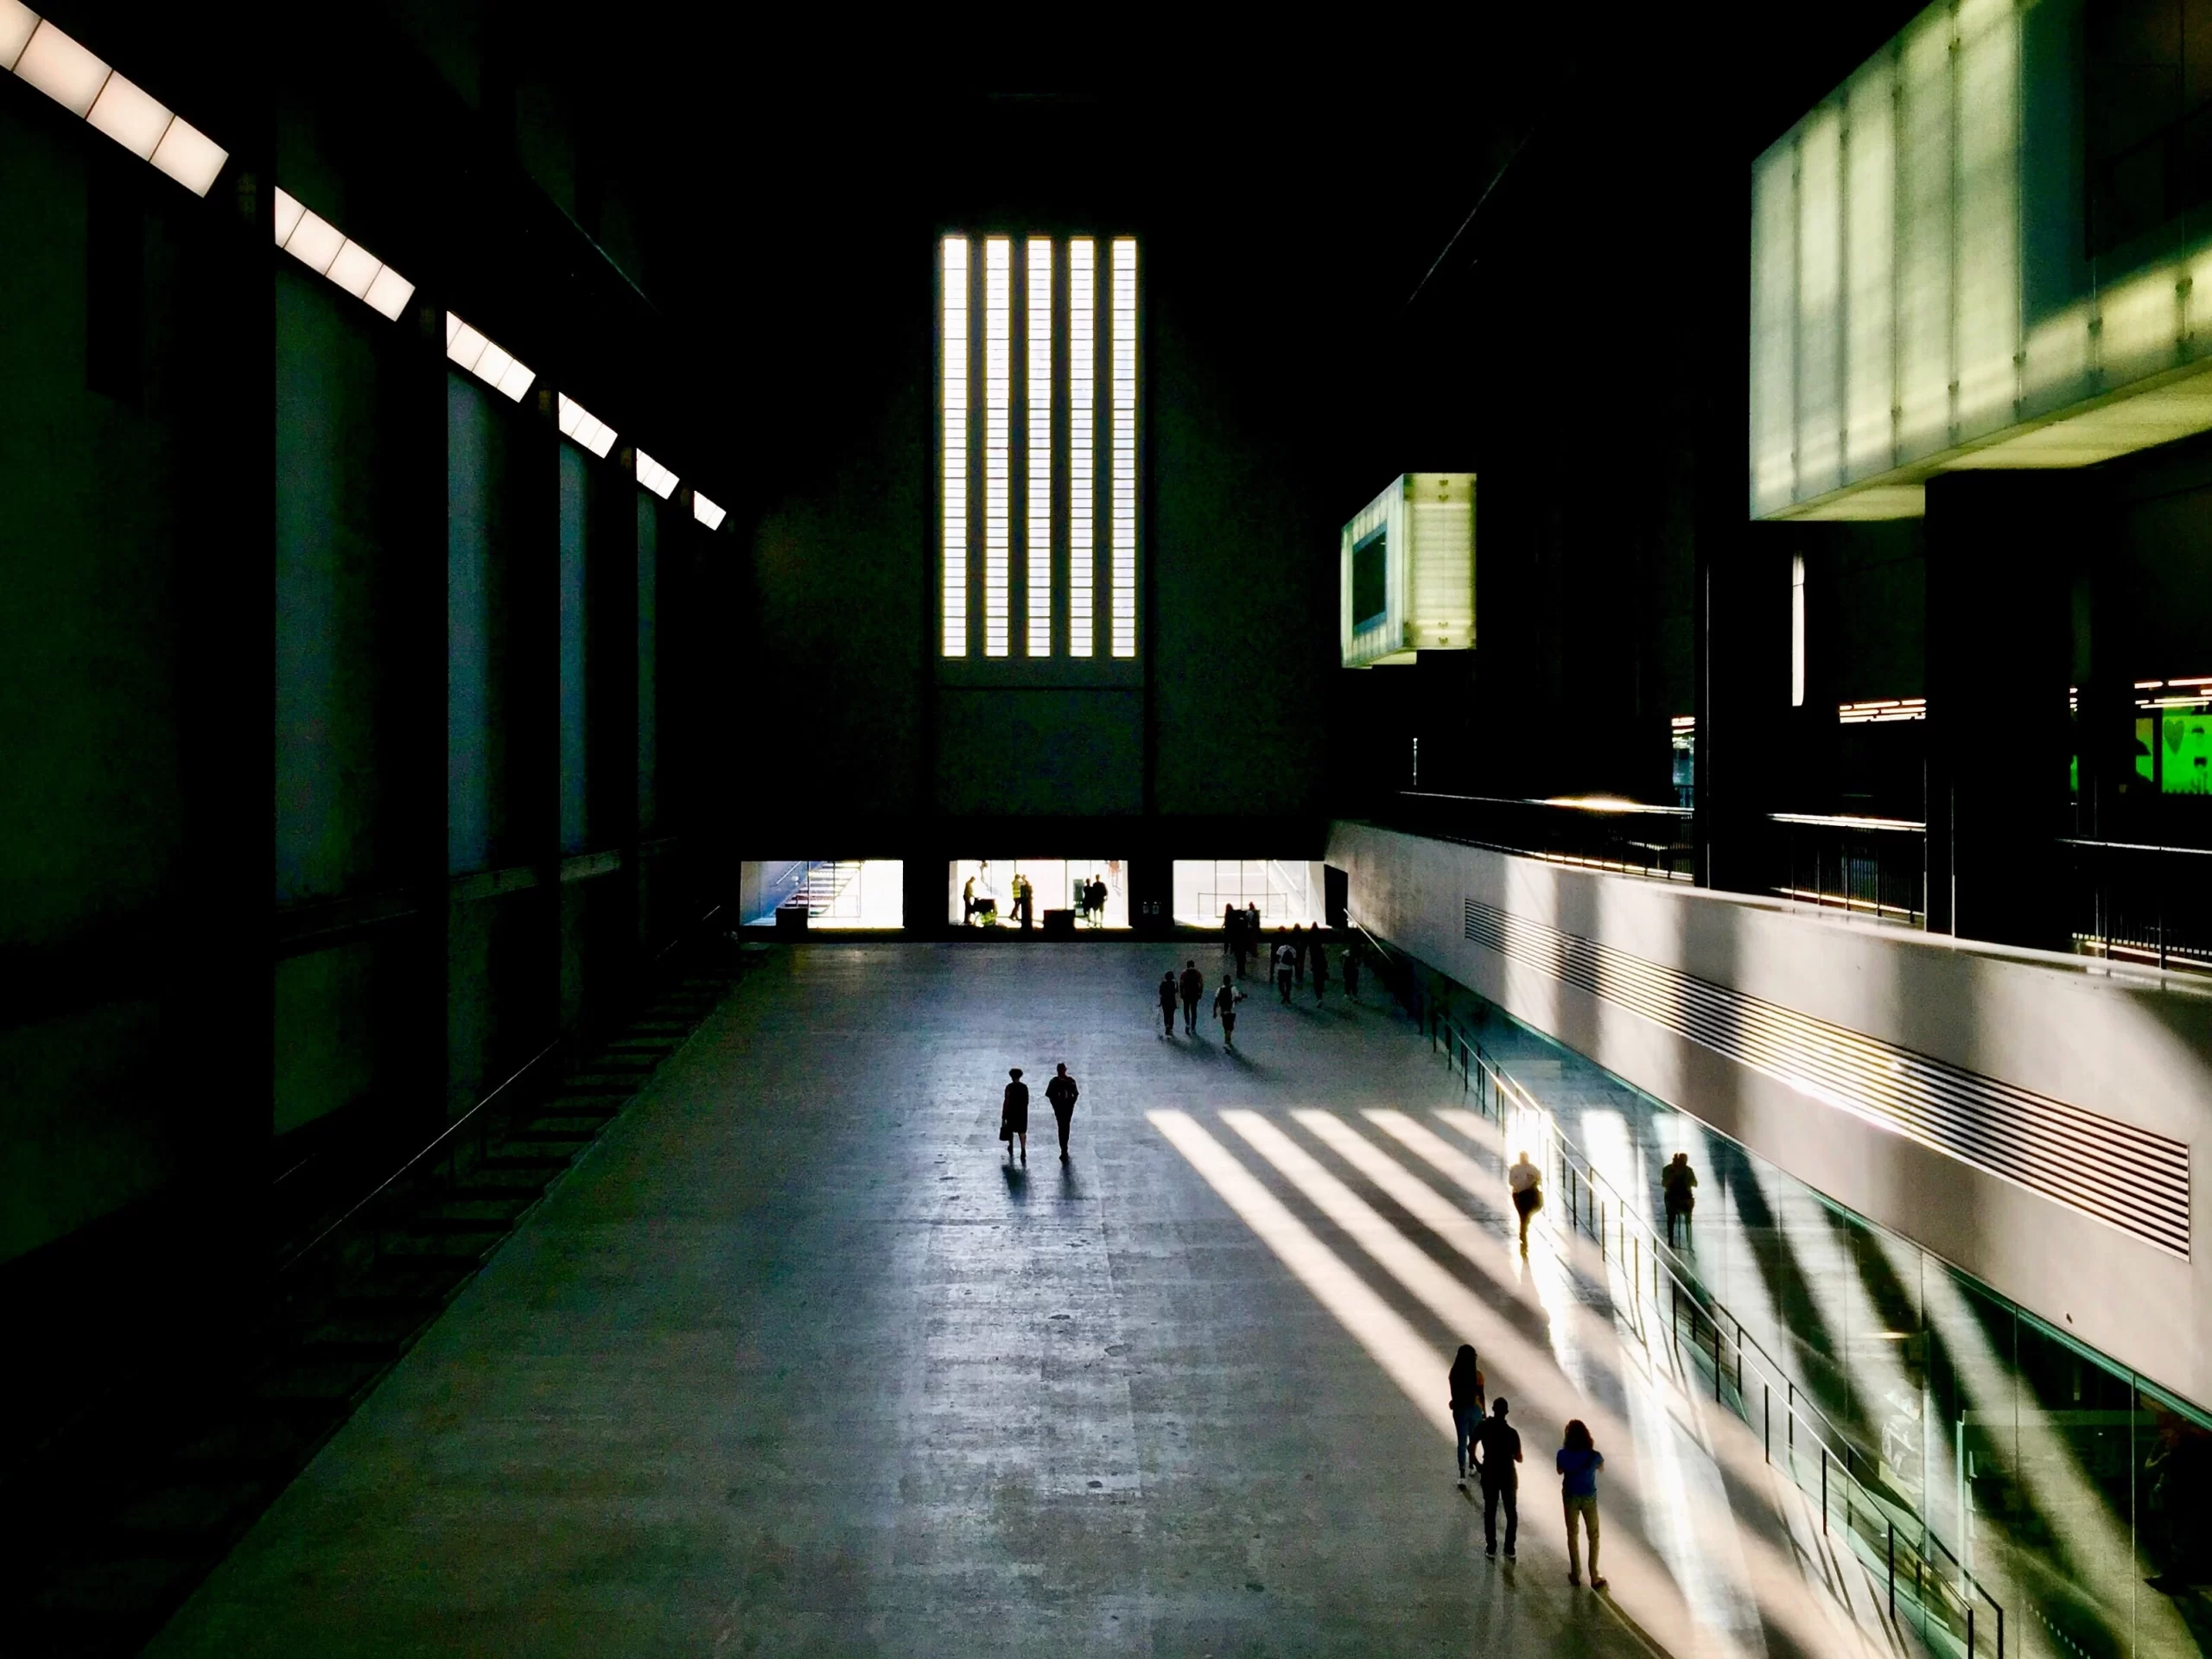 Tate Modern, London, Regno Unito Published on June 25, 2020 Apple, iPhone 6 Plus Free to use under the Unsplash License Tate Modern, London